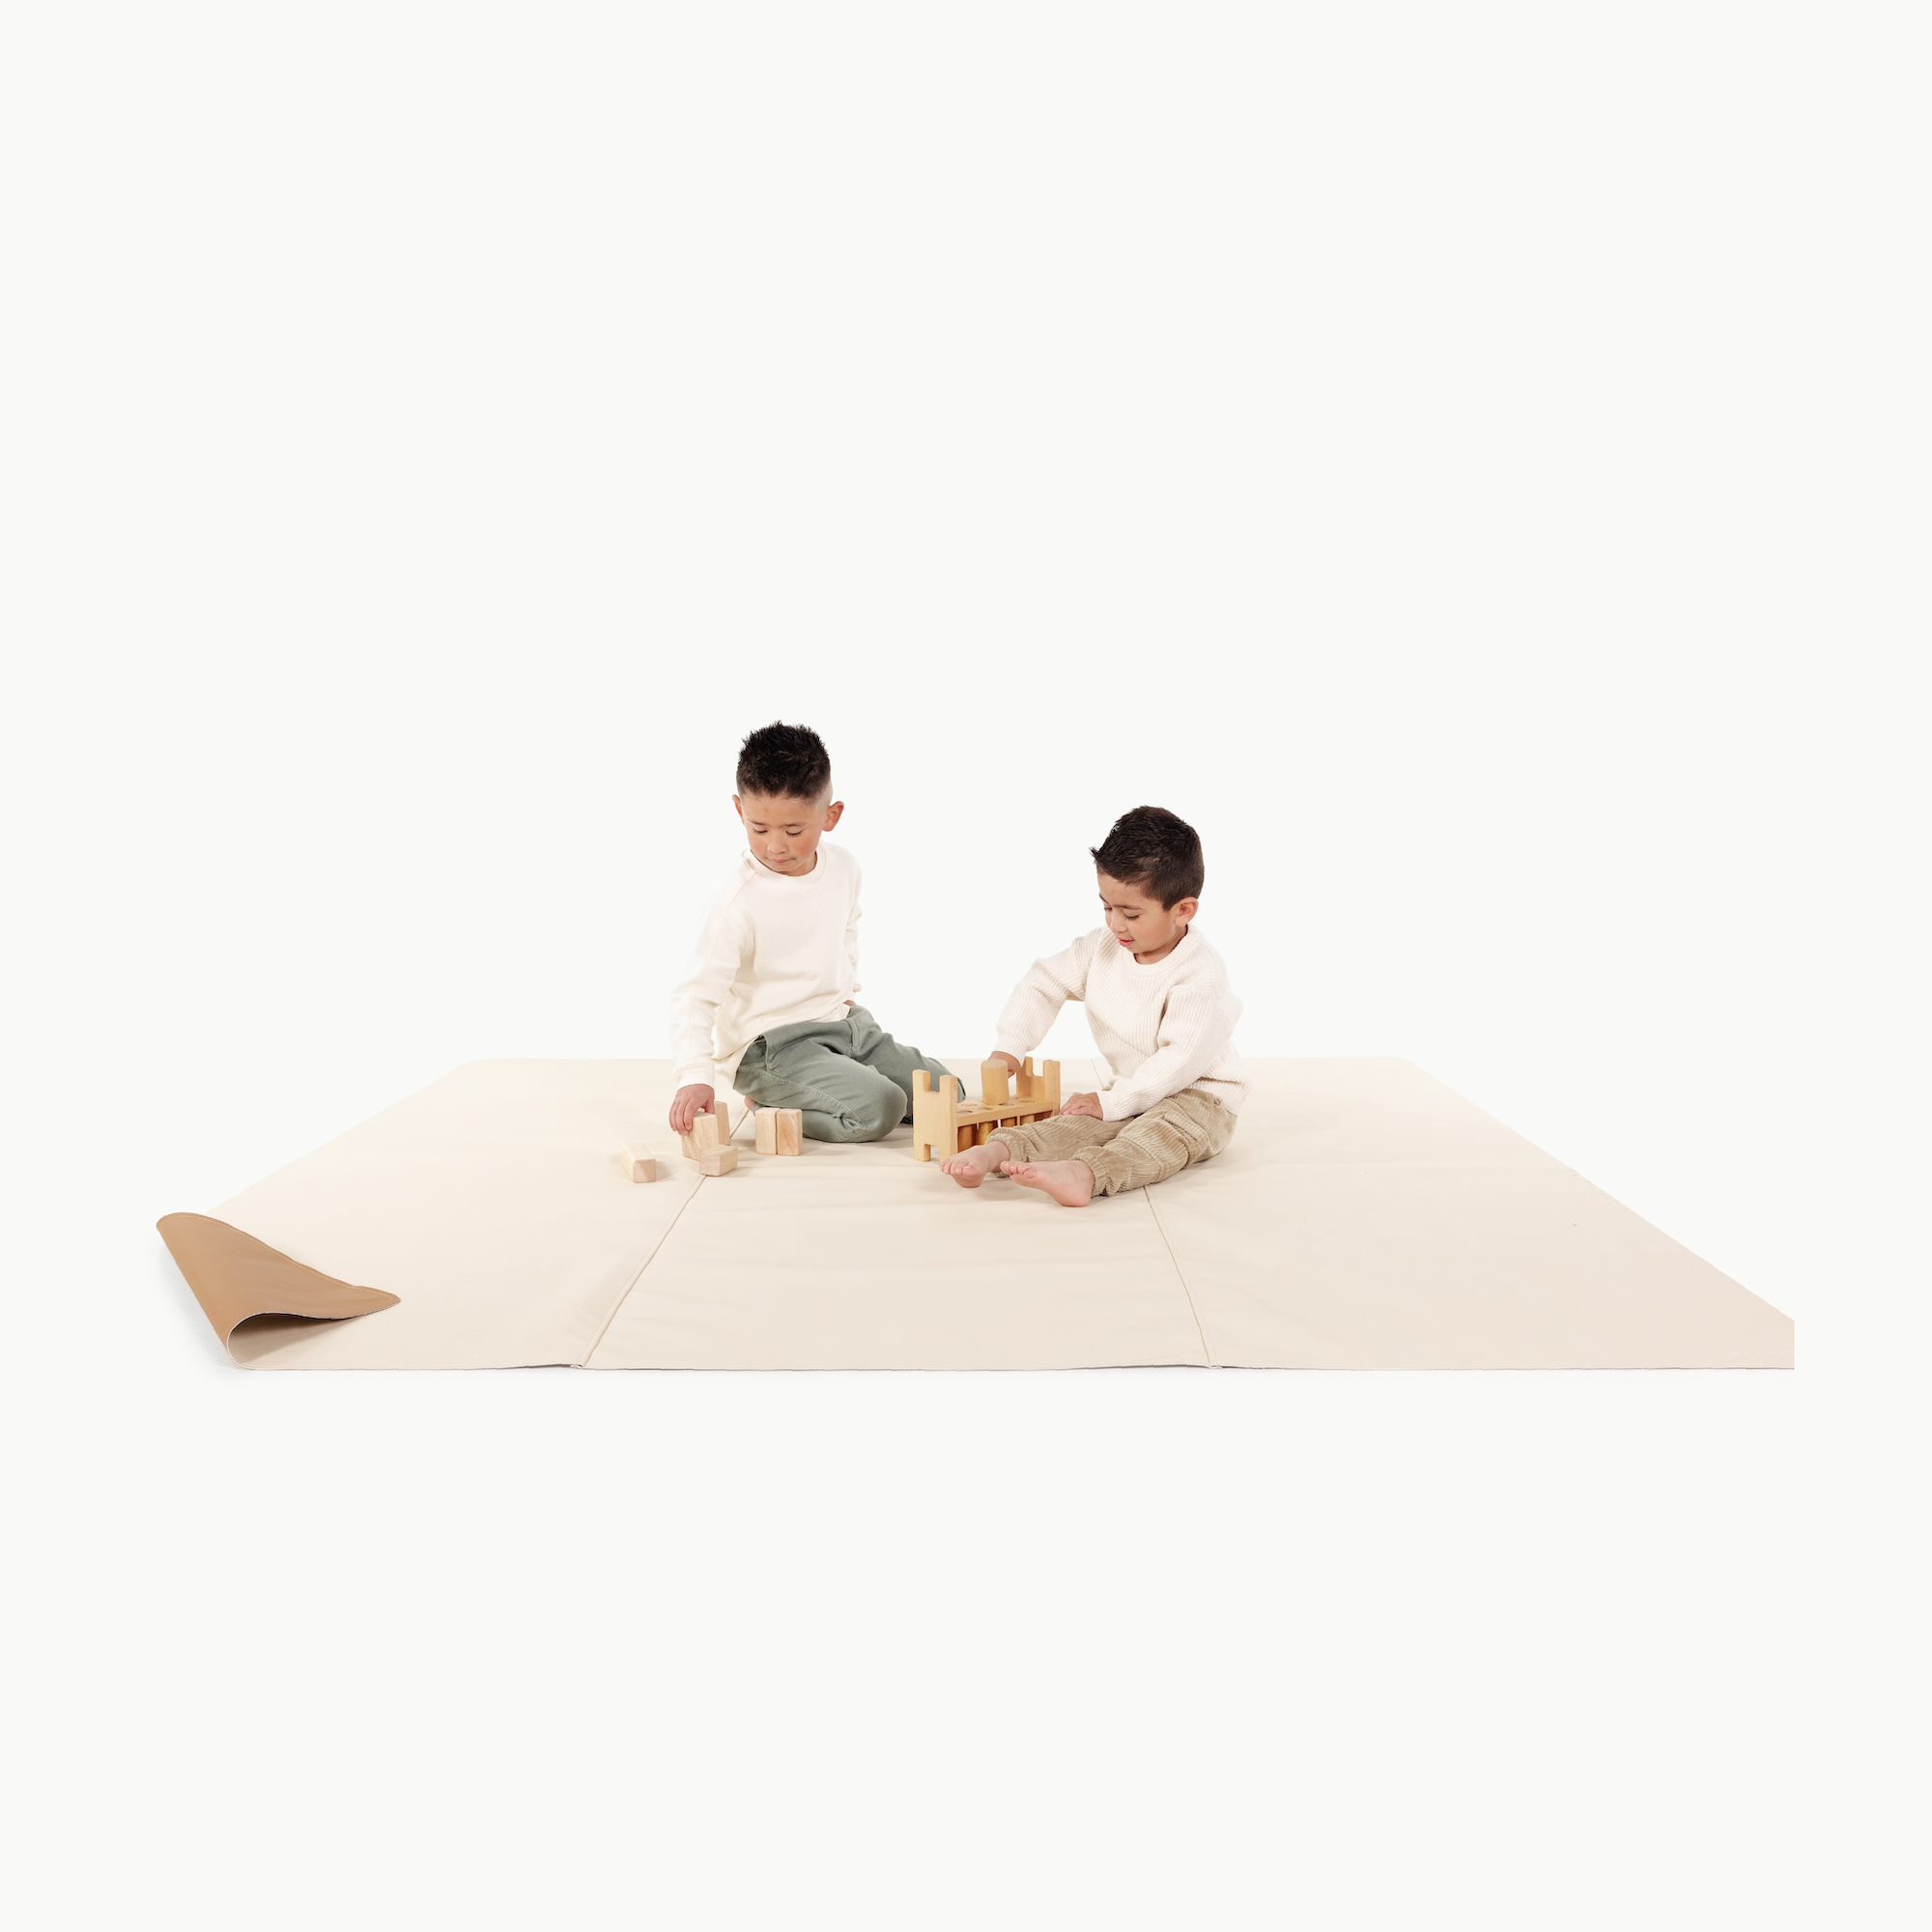 Camel • Ivory / Square@Kids playing on mat